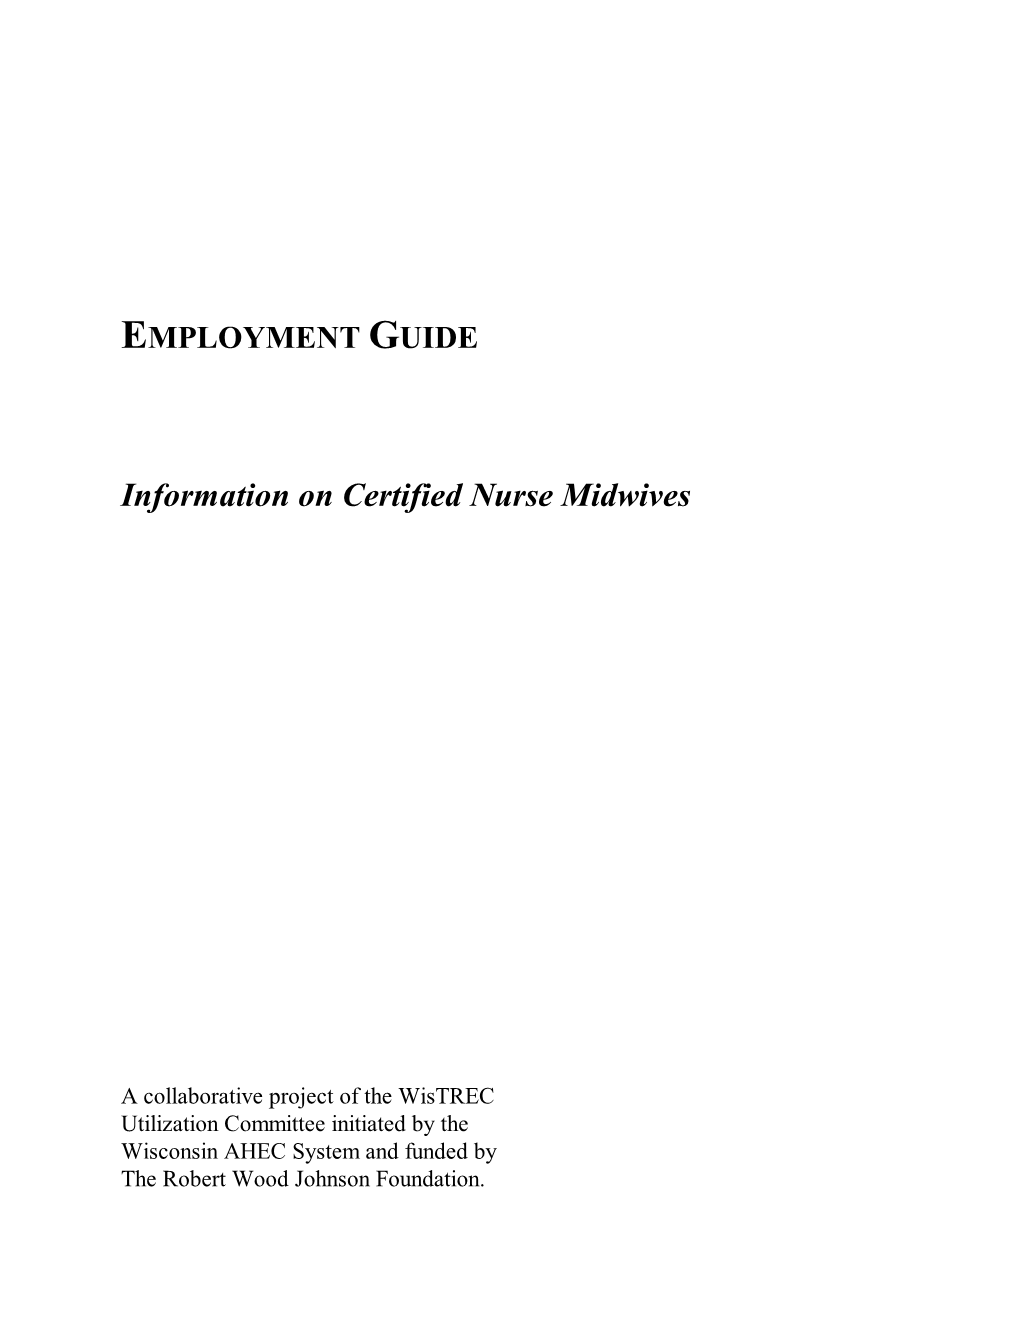 Information on Certified Nurse Midwives